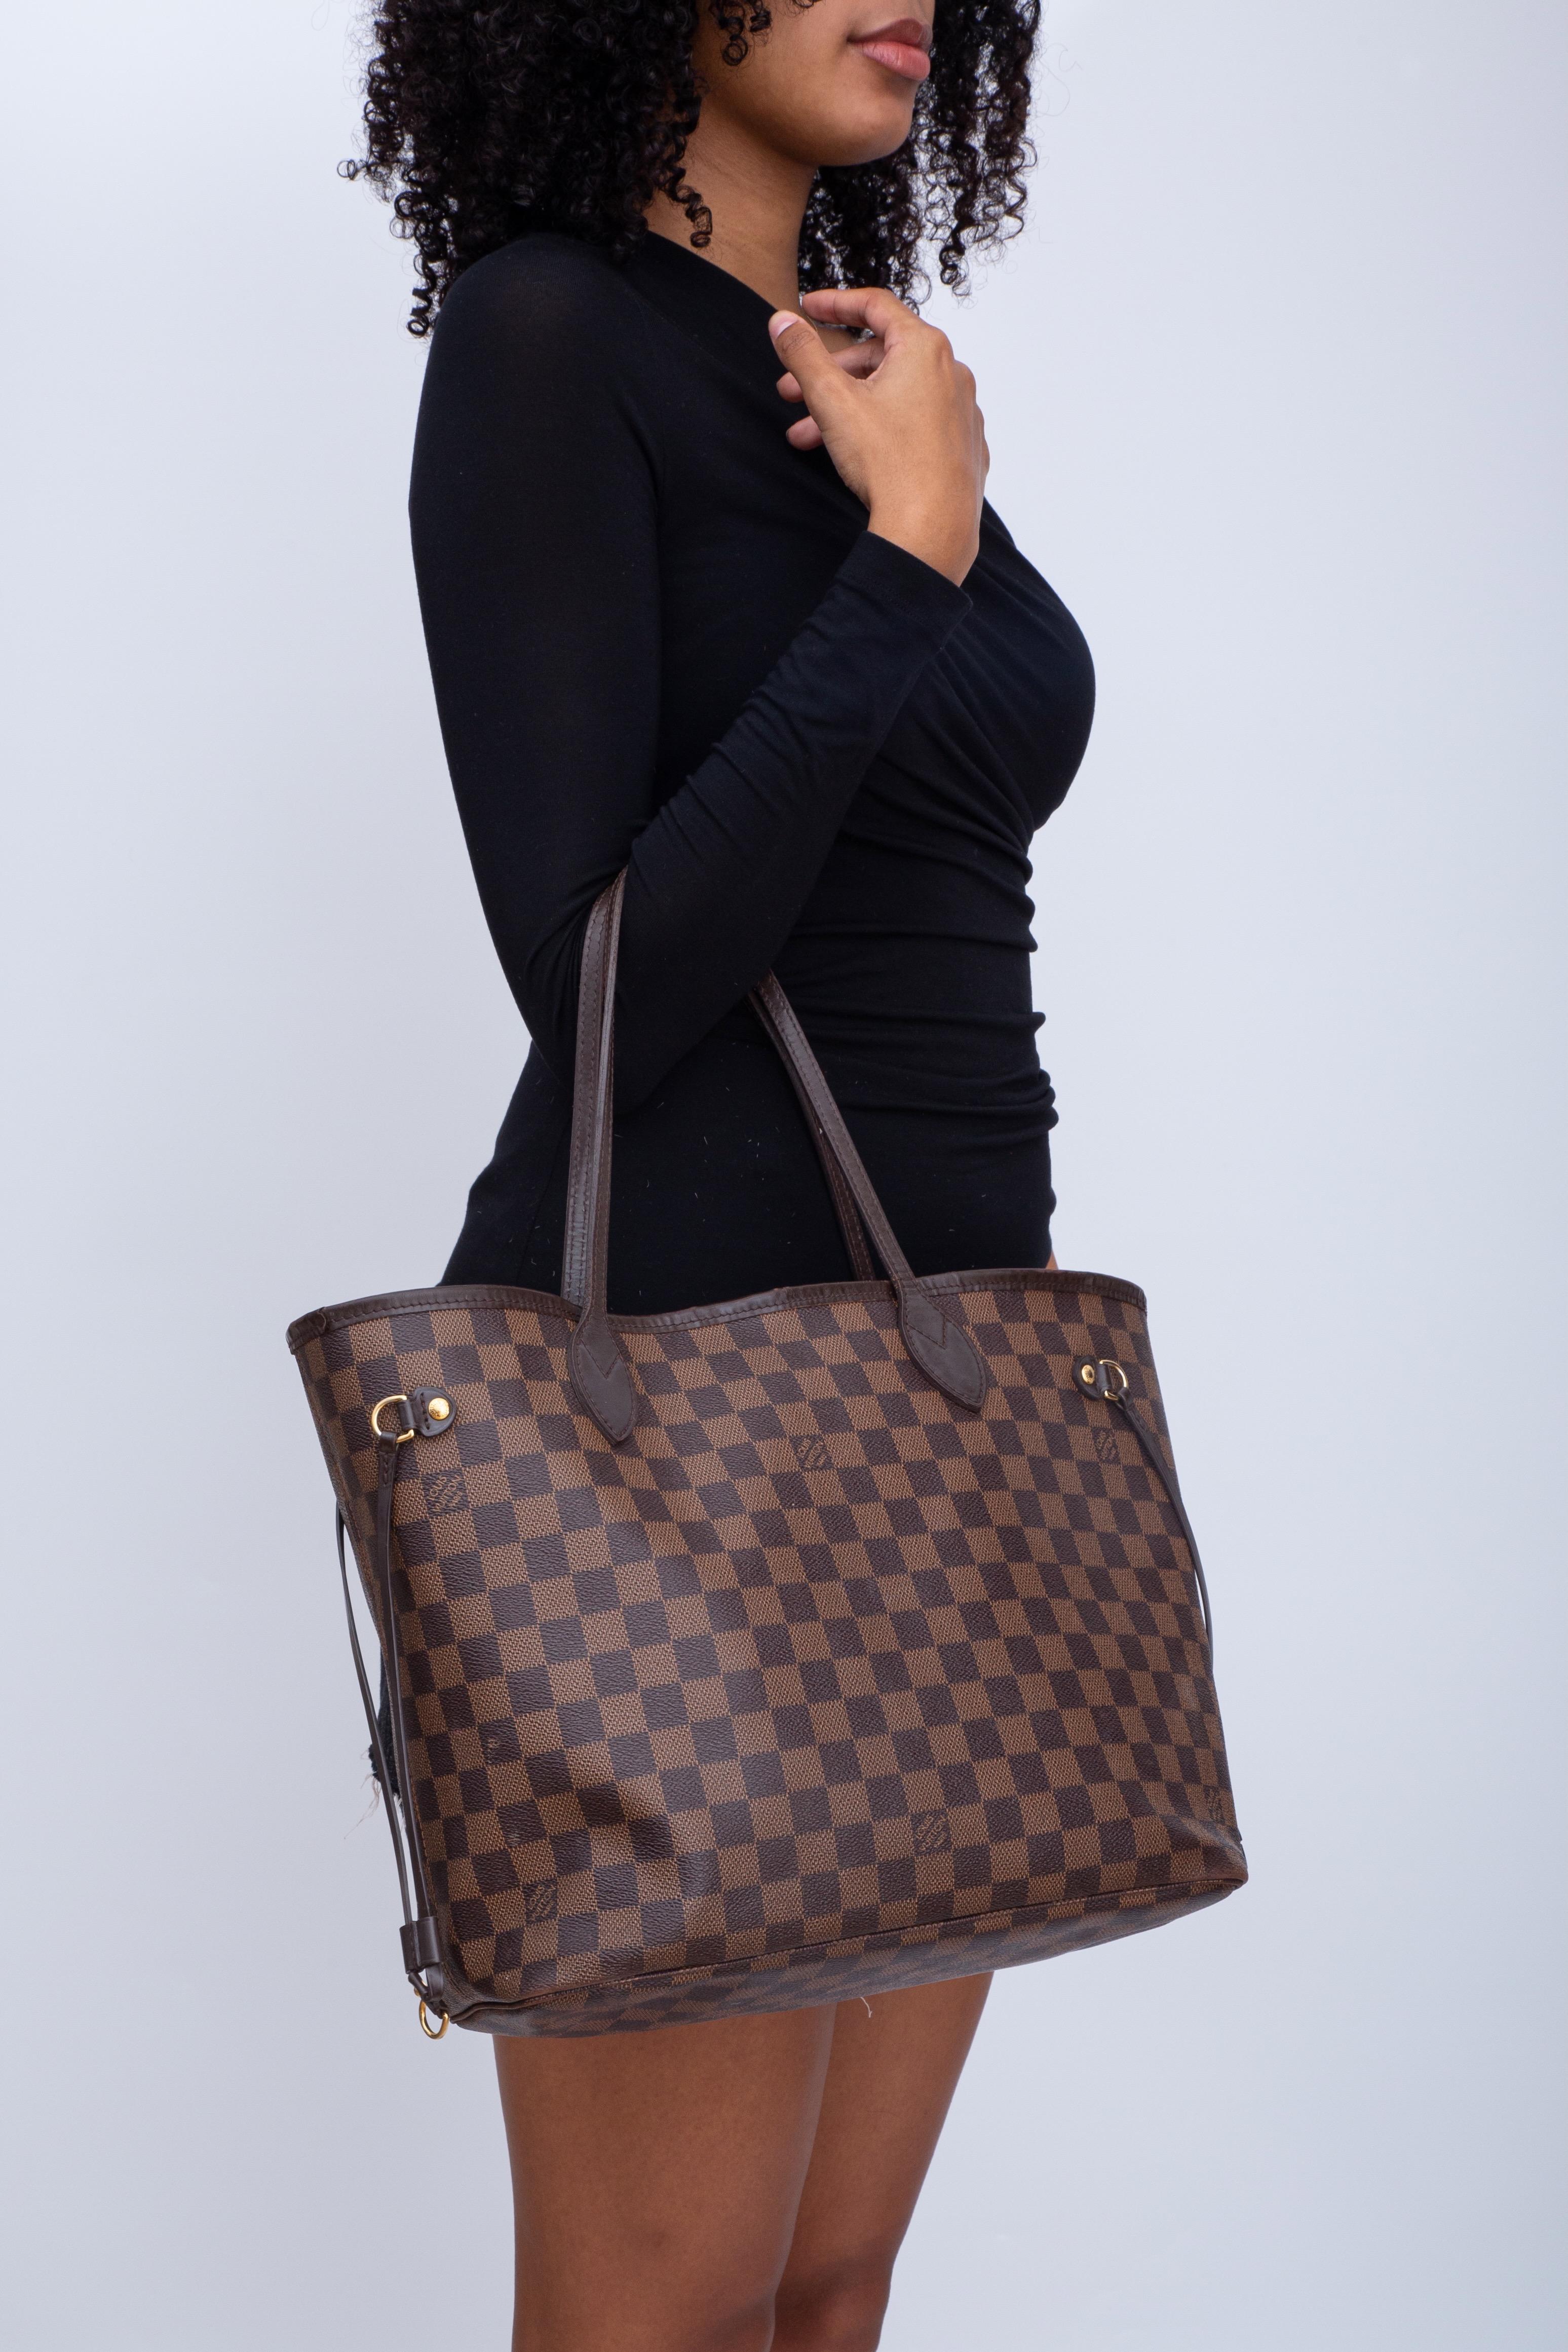 Louis Vuitton Damier Ebene Neverfull Tote MM (2013) For Sale 5